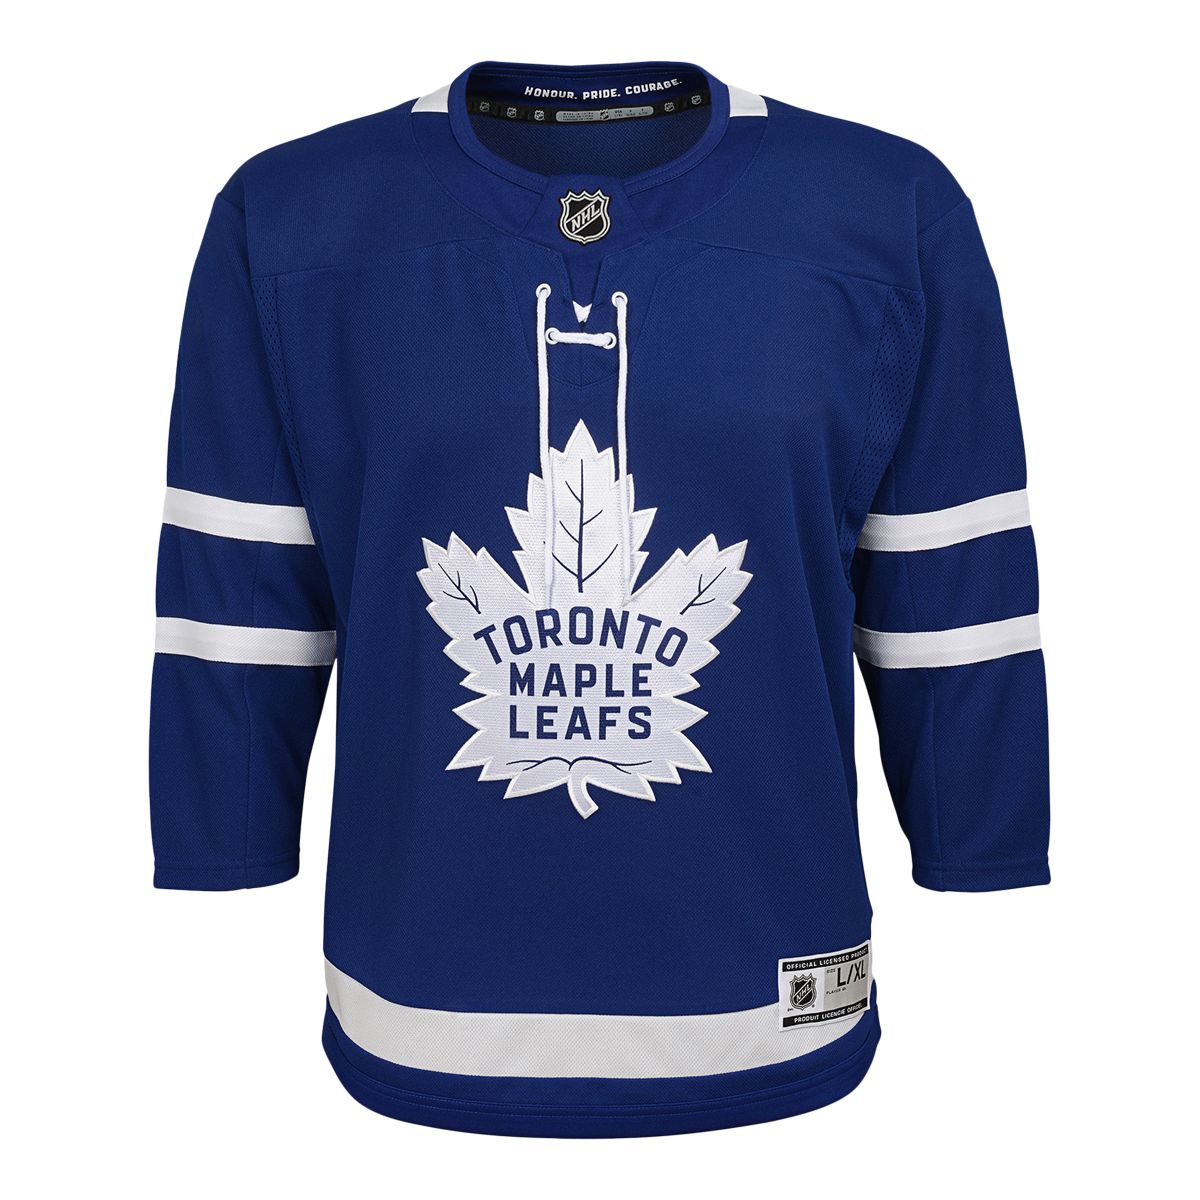 Warrior KH130 Youth Hockey Jersey - Toronto Maple Leafs in Blue Size Small/Medium